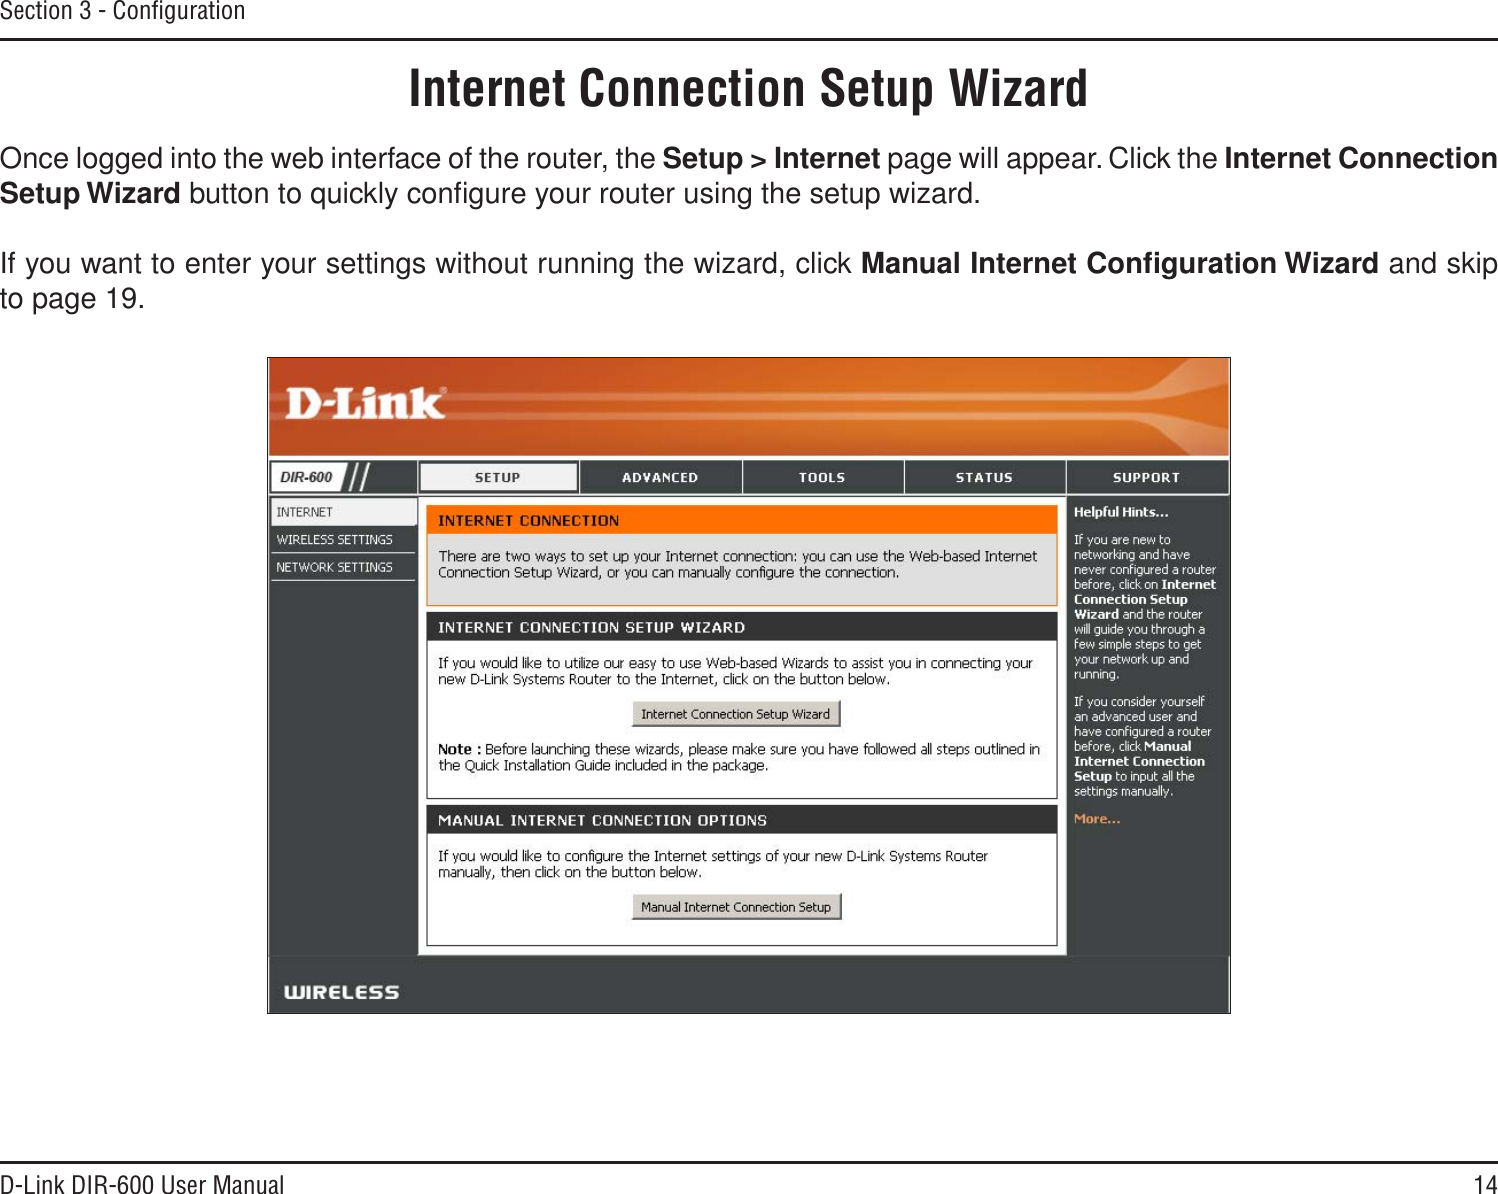 14D-Link DIR-600 User ManualSection 3 - ConﬁgurationInternet Connection Setup WizardOnce logged into the web interface of the router, the Setup &gt; Internet page will appear. Click the Internet ConnectionSetup Wizard button to quickly conﬁgure your router using the setup wizard.If you want to enter your settings without running the wizard, click Manual Internet Conﬁguration Wizard and skip to page 19.